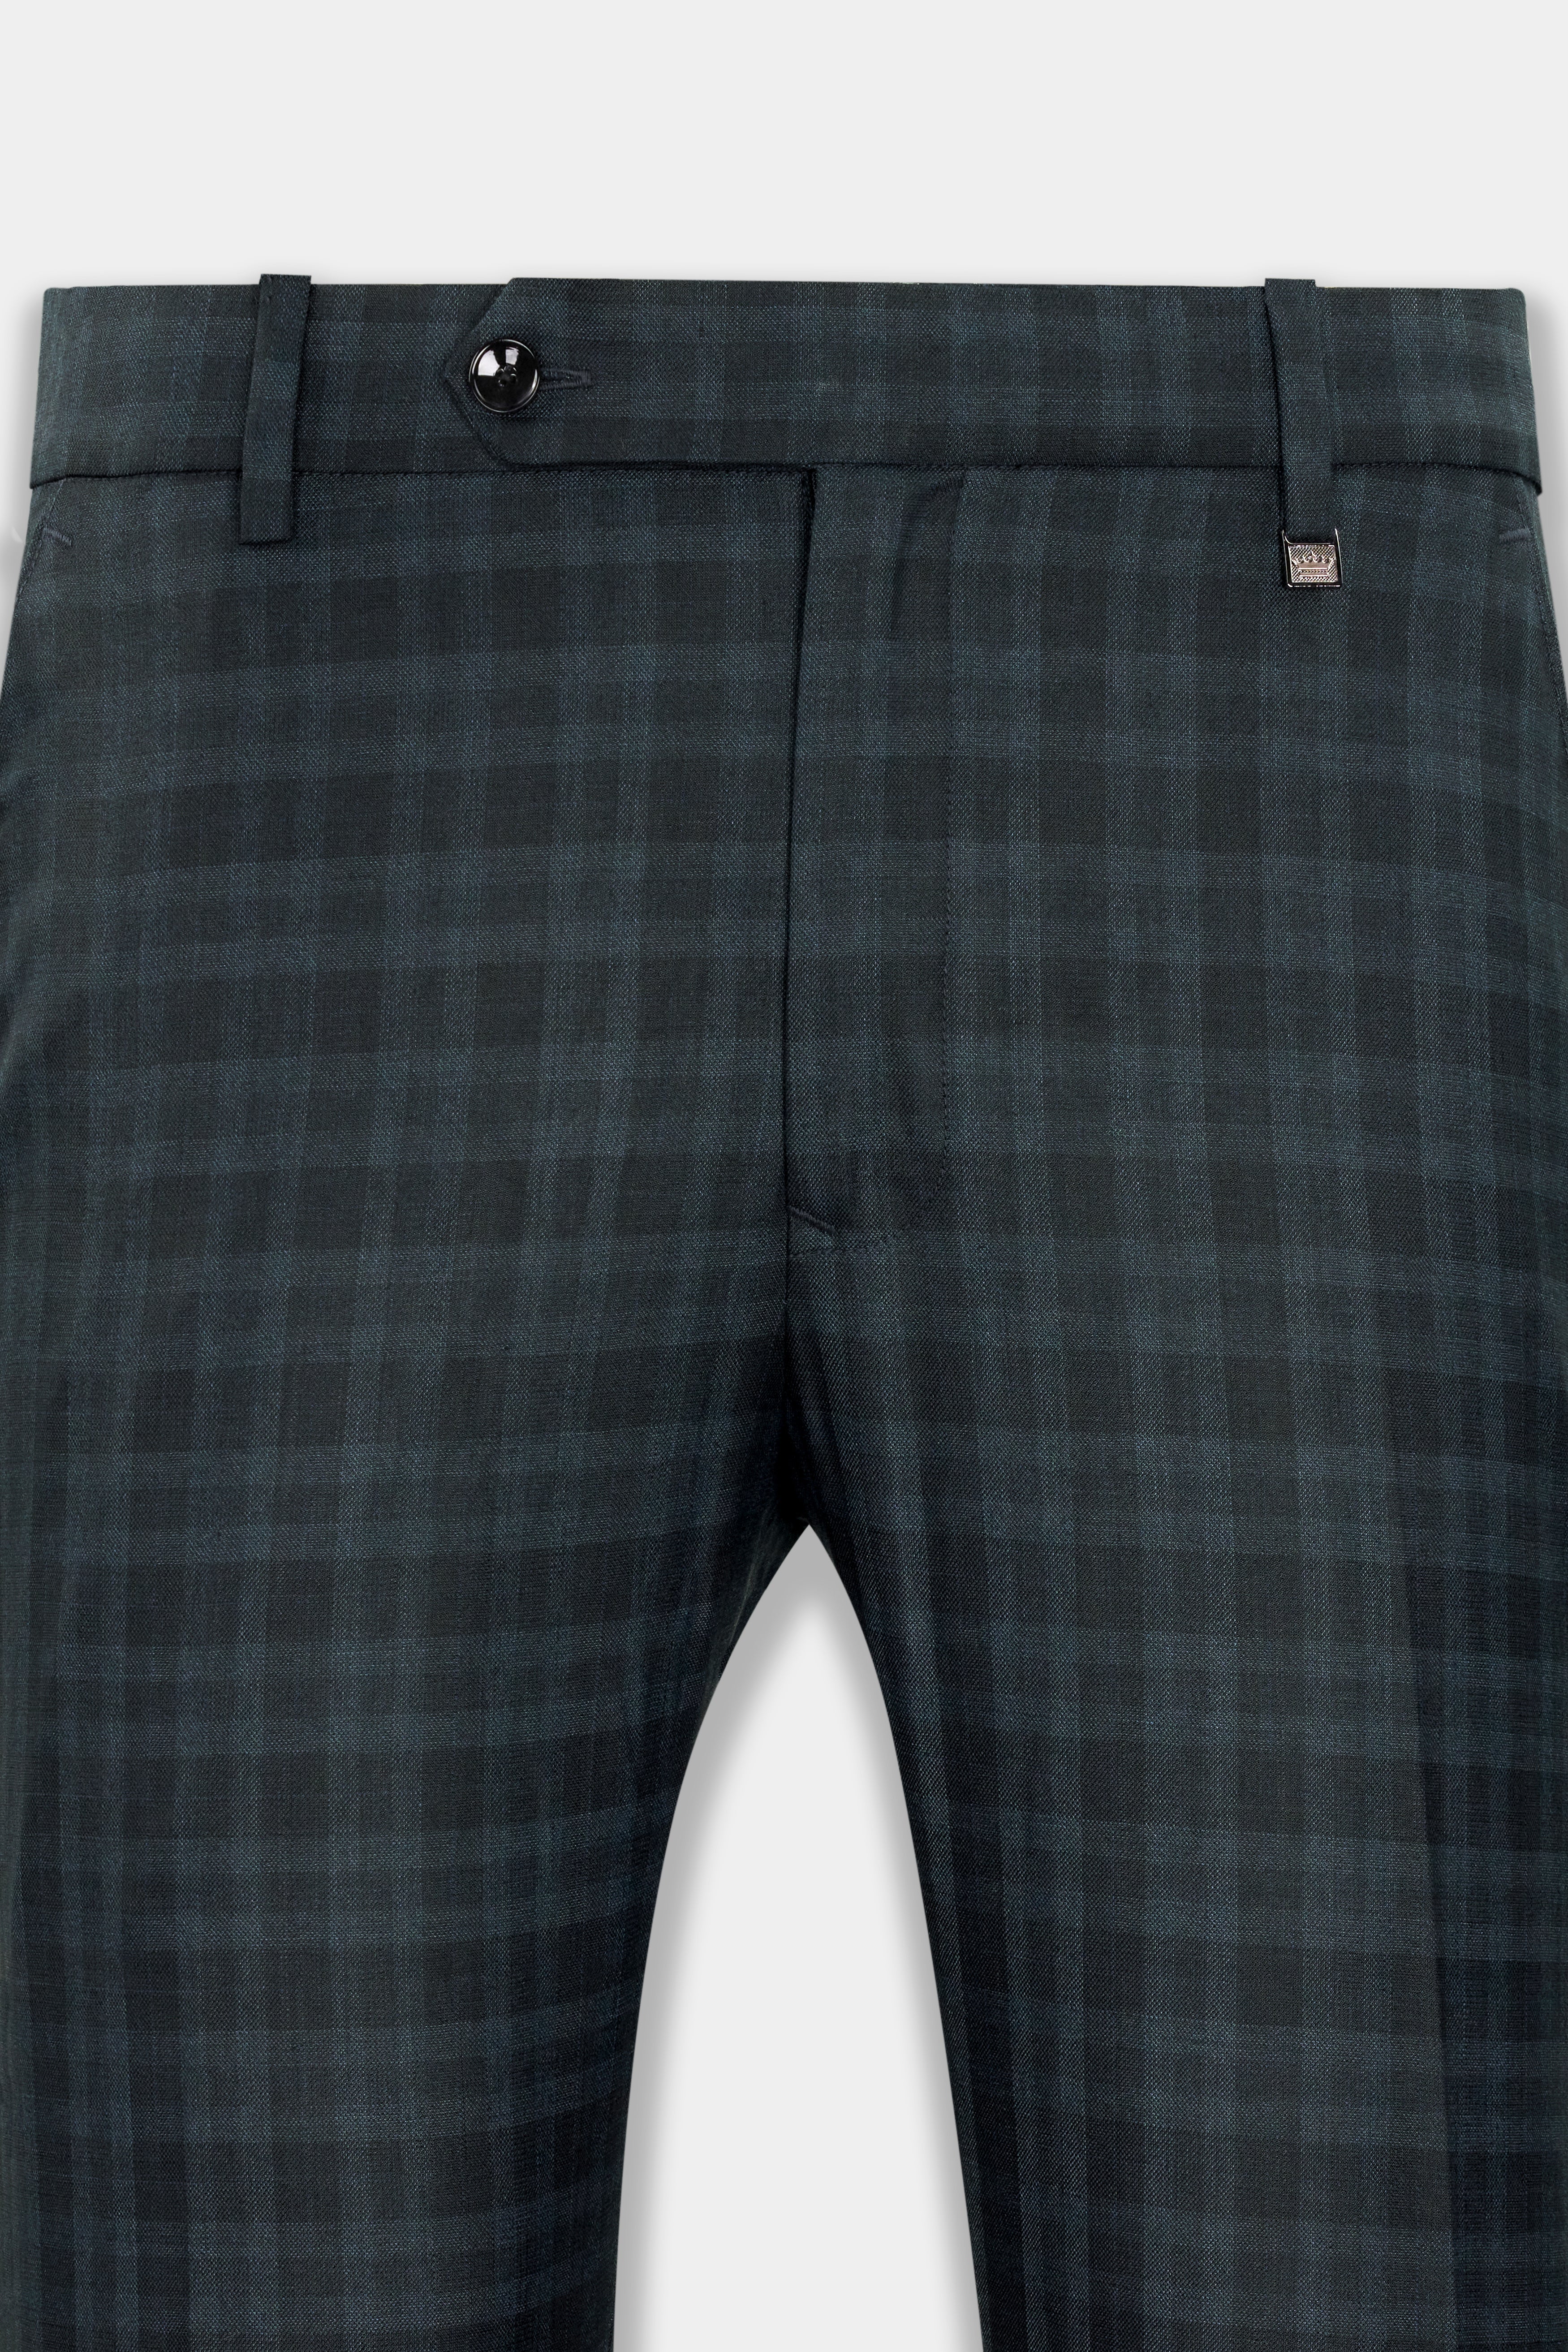 Baltic Sea Blue with Tuna Navy Blue Checkered Wool Rich Pant T2738-28, T2738-30, T2738-32, T2738-34, T2738-36, T2738-38, T2738-40, T2738-42, T2738-44